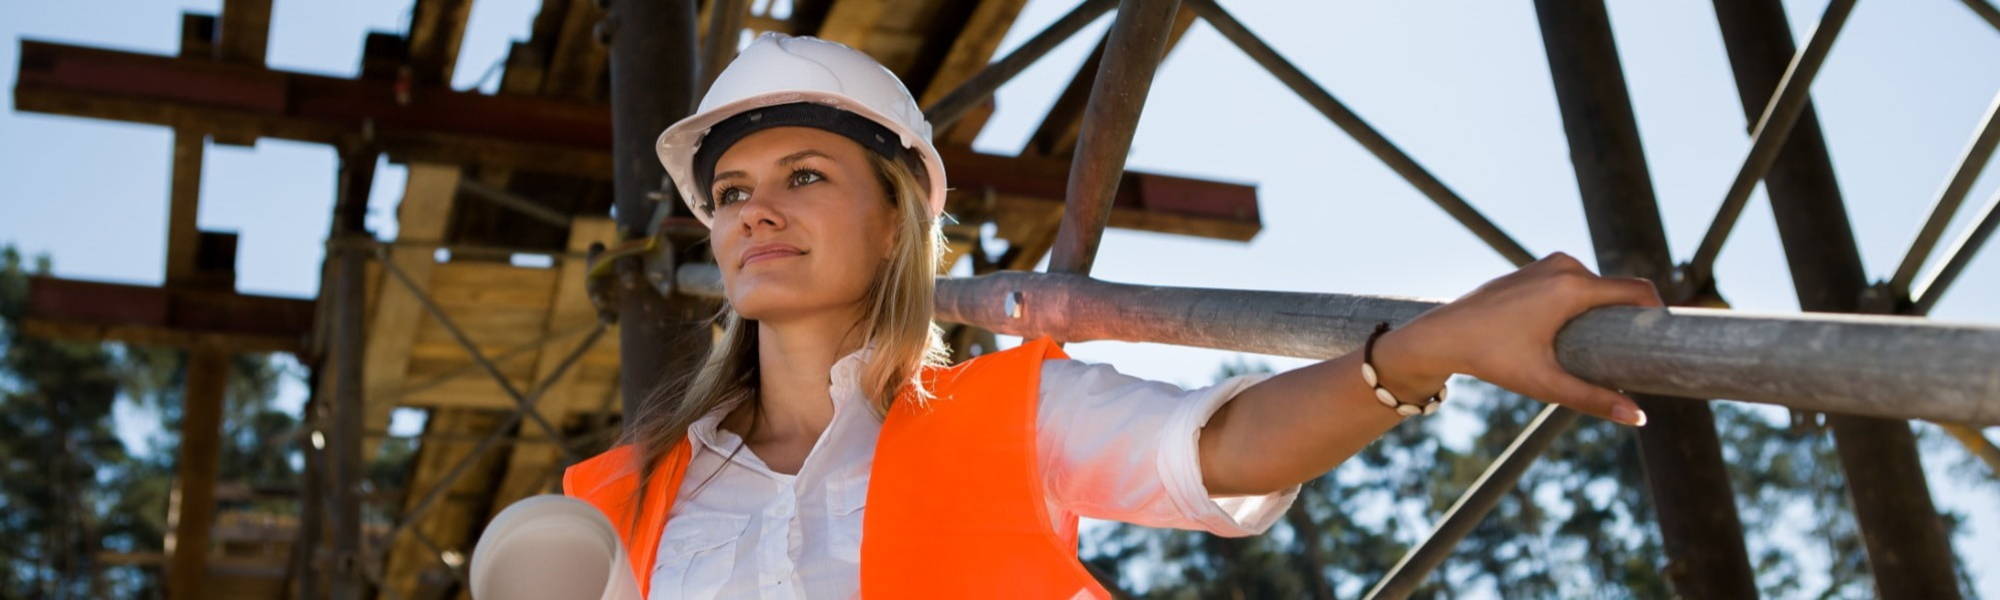 a woman standing next to scaffolding wearing a white hard hat and orange safety vest